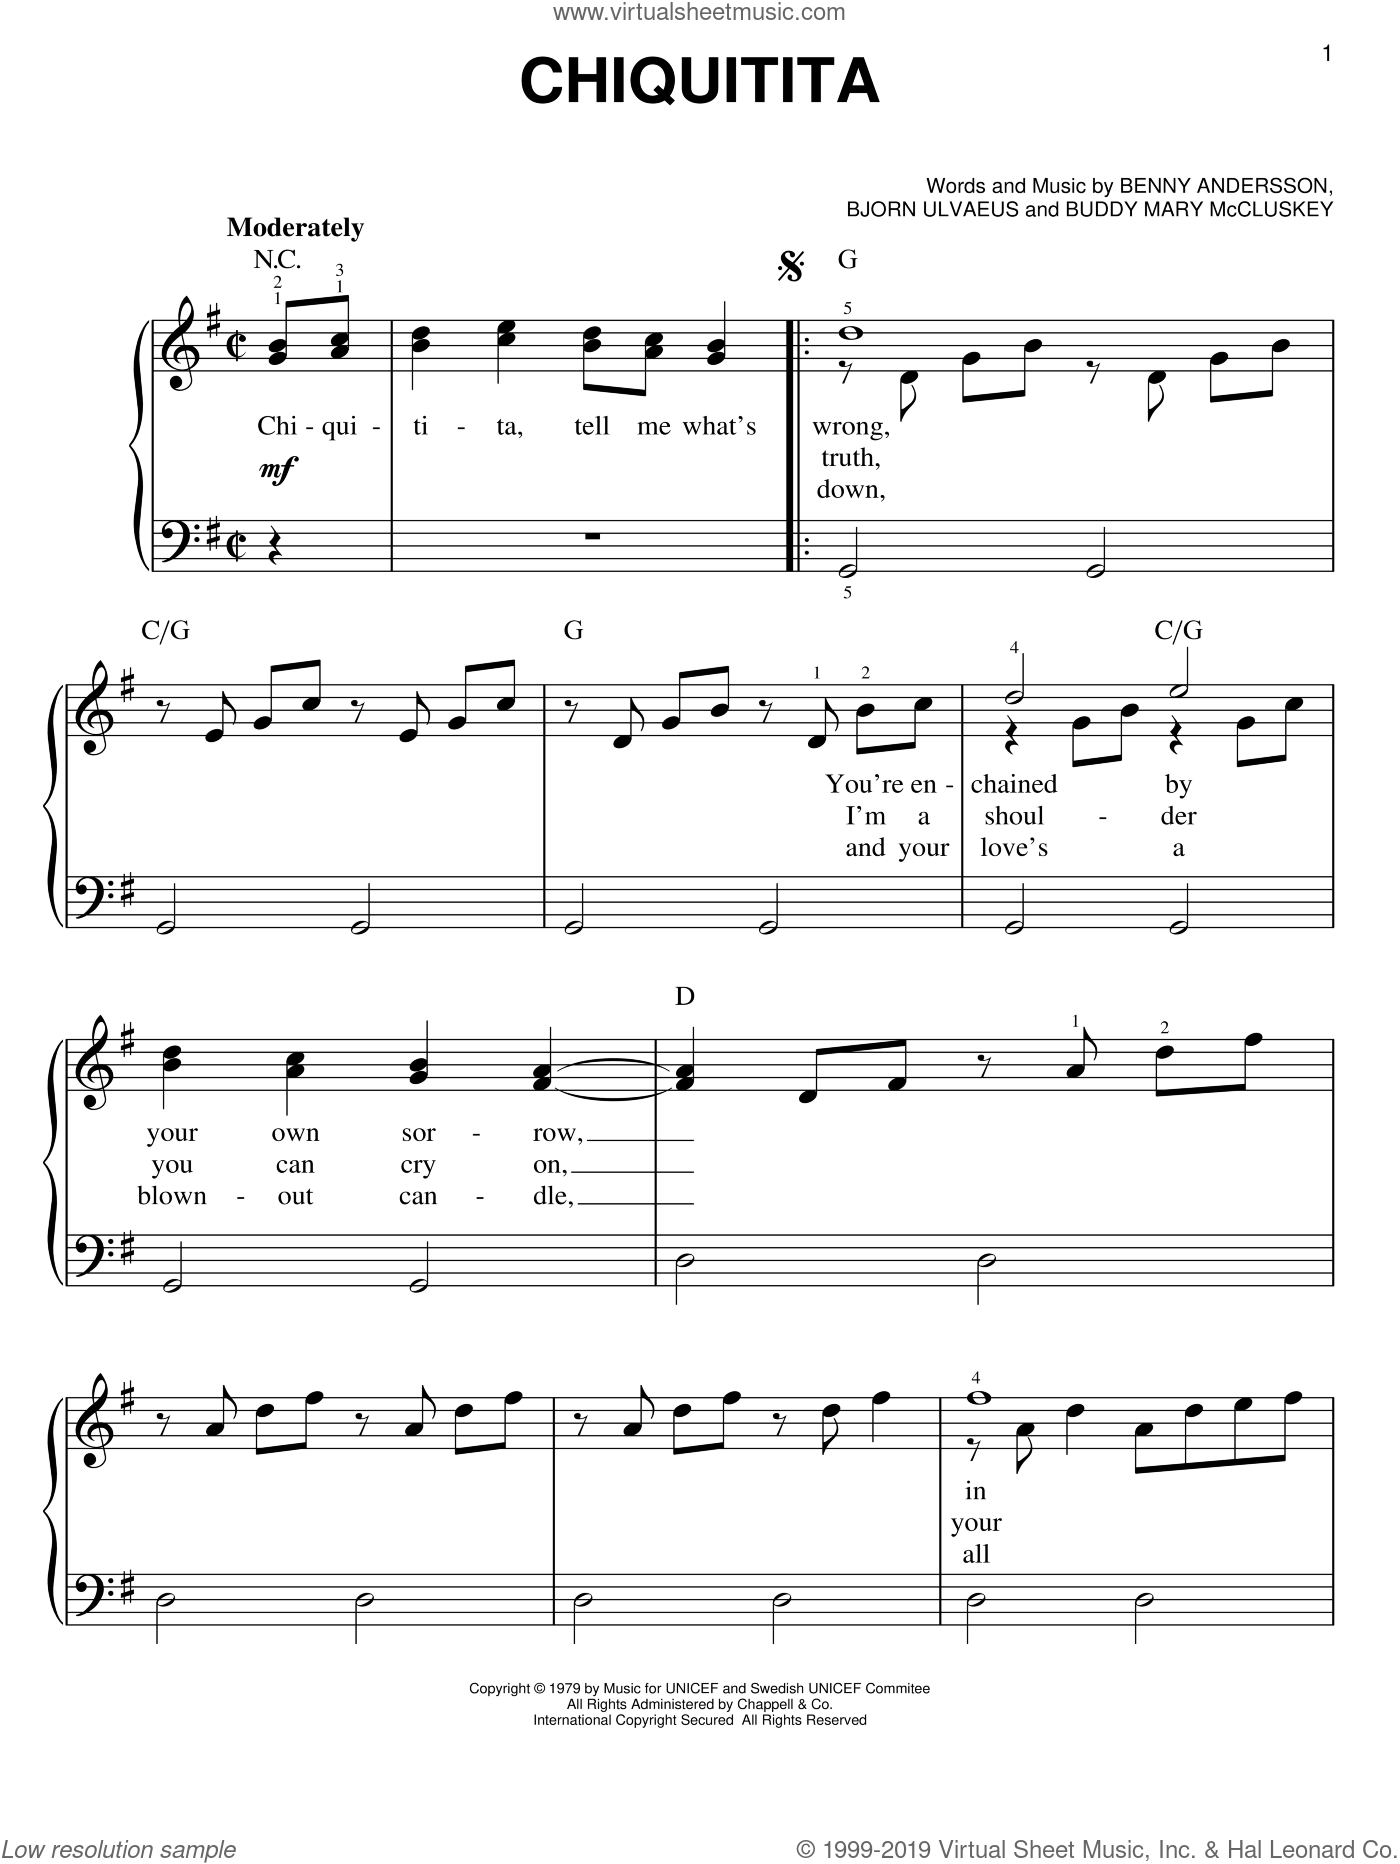 Abba Chiquitita Easy Sheet Music For Piano Solo Pdf 271,255 views, added to favorites 10,038 times. abba chiquitita easy sheet music for piano solo pdf